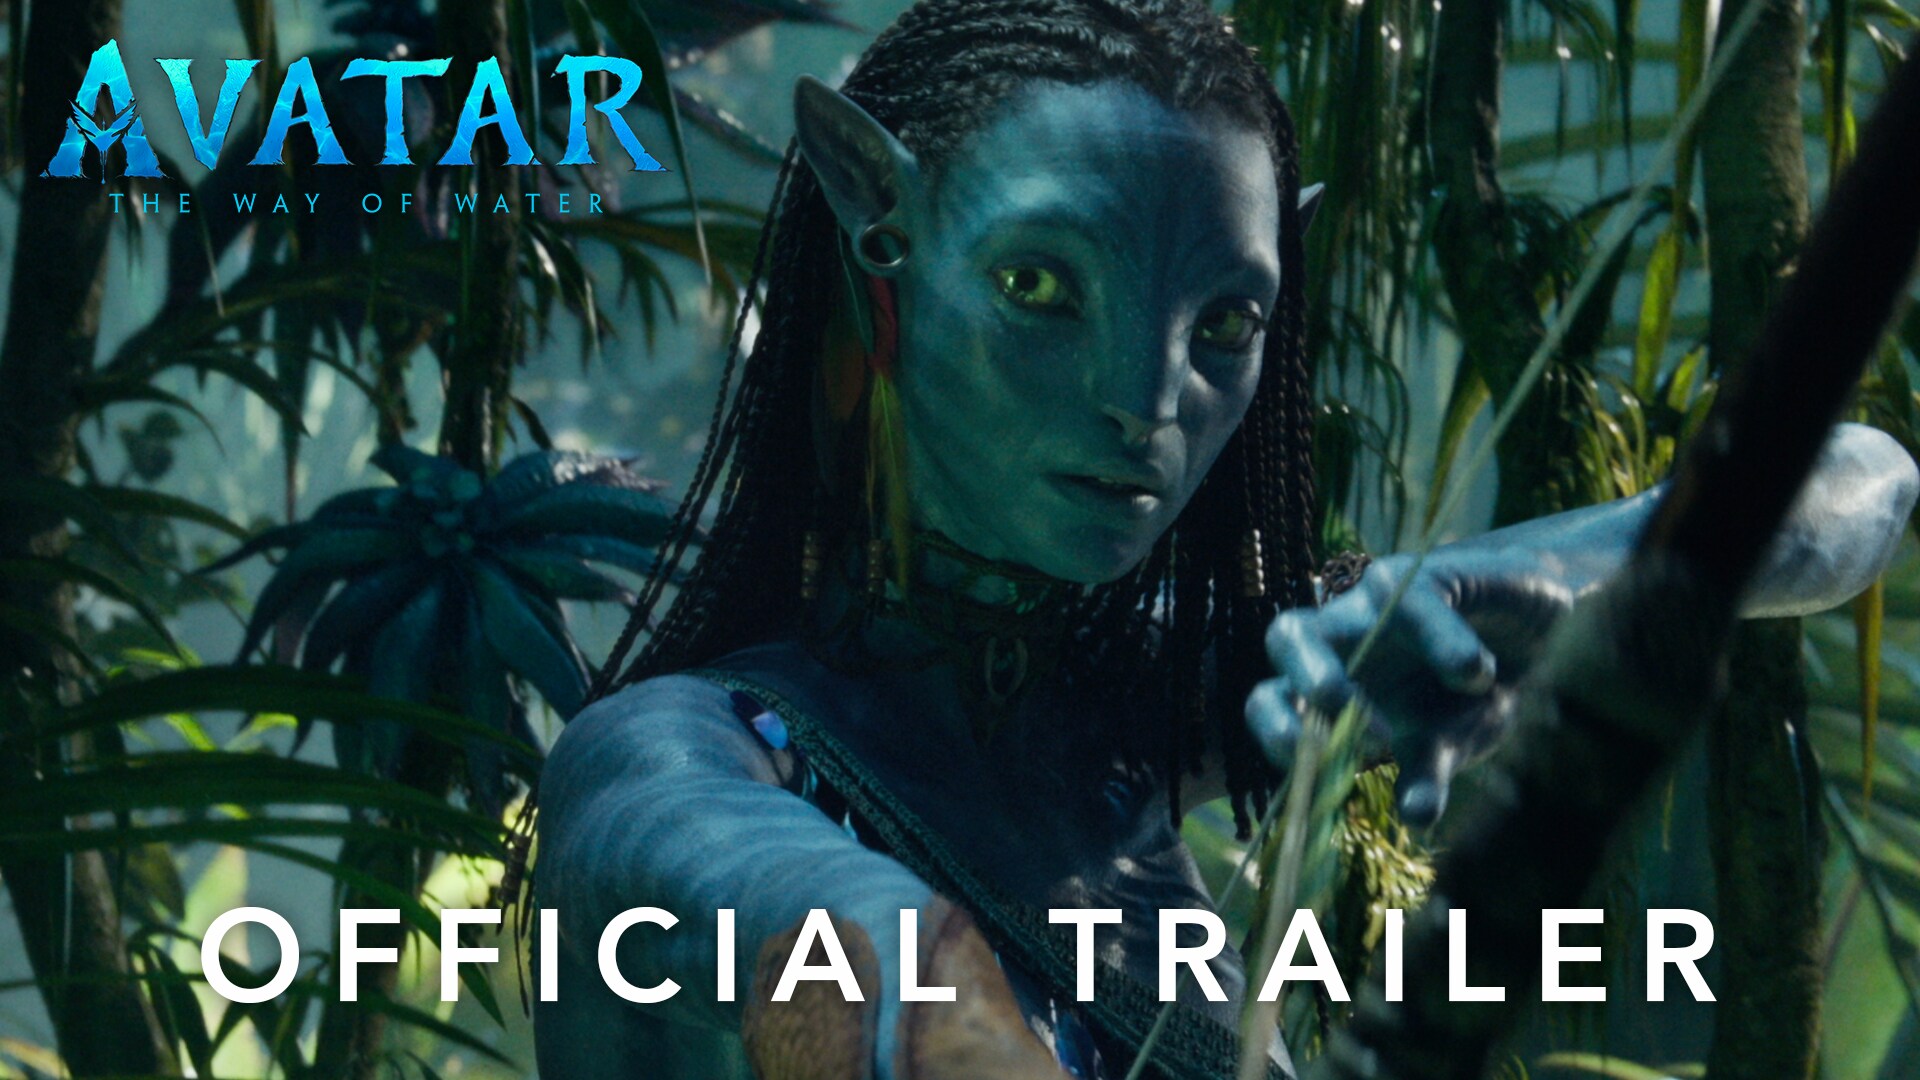 Avatar: The Way of Water | Official Trailer - TH Subtitled